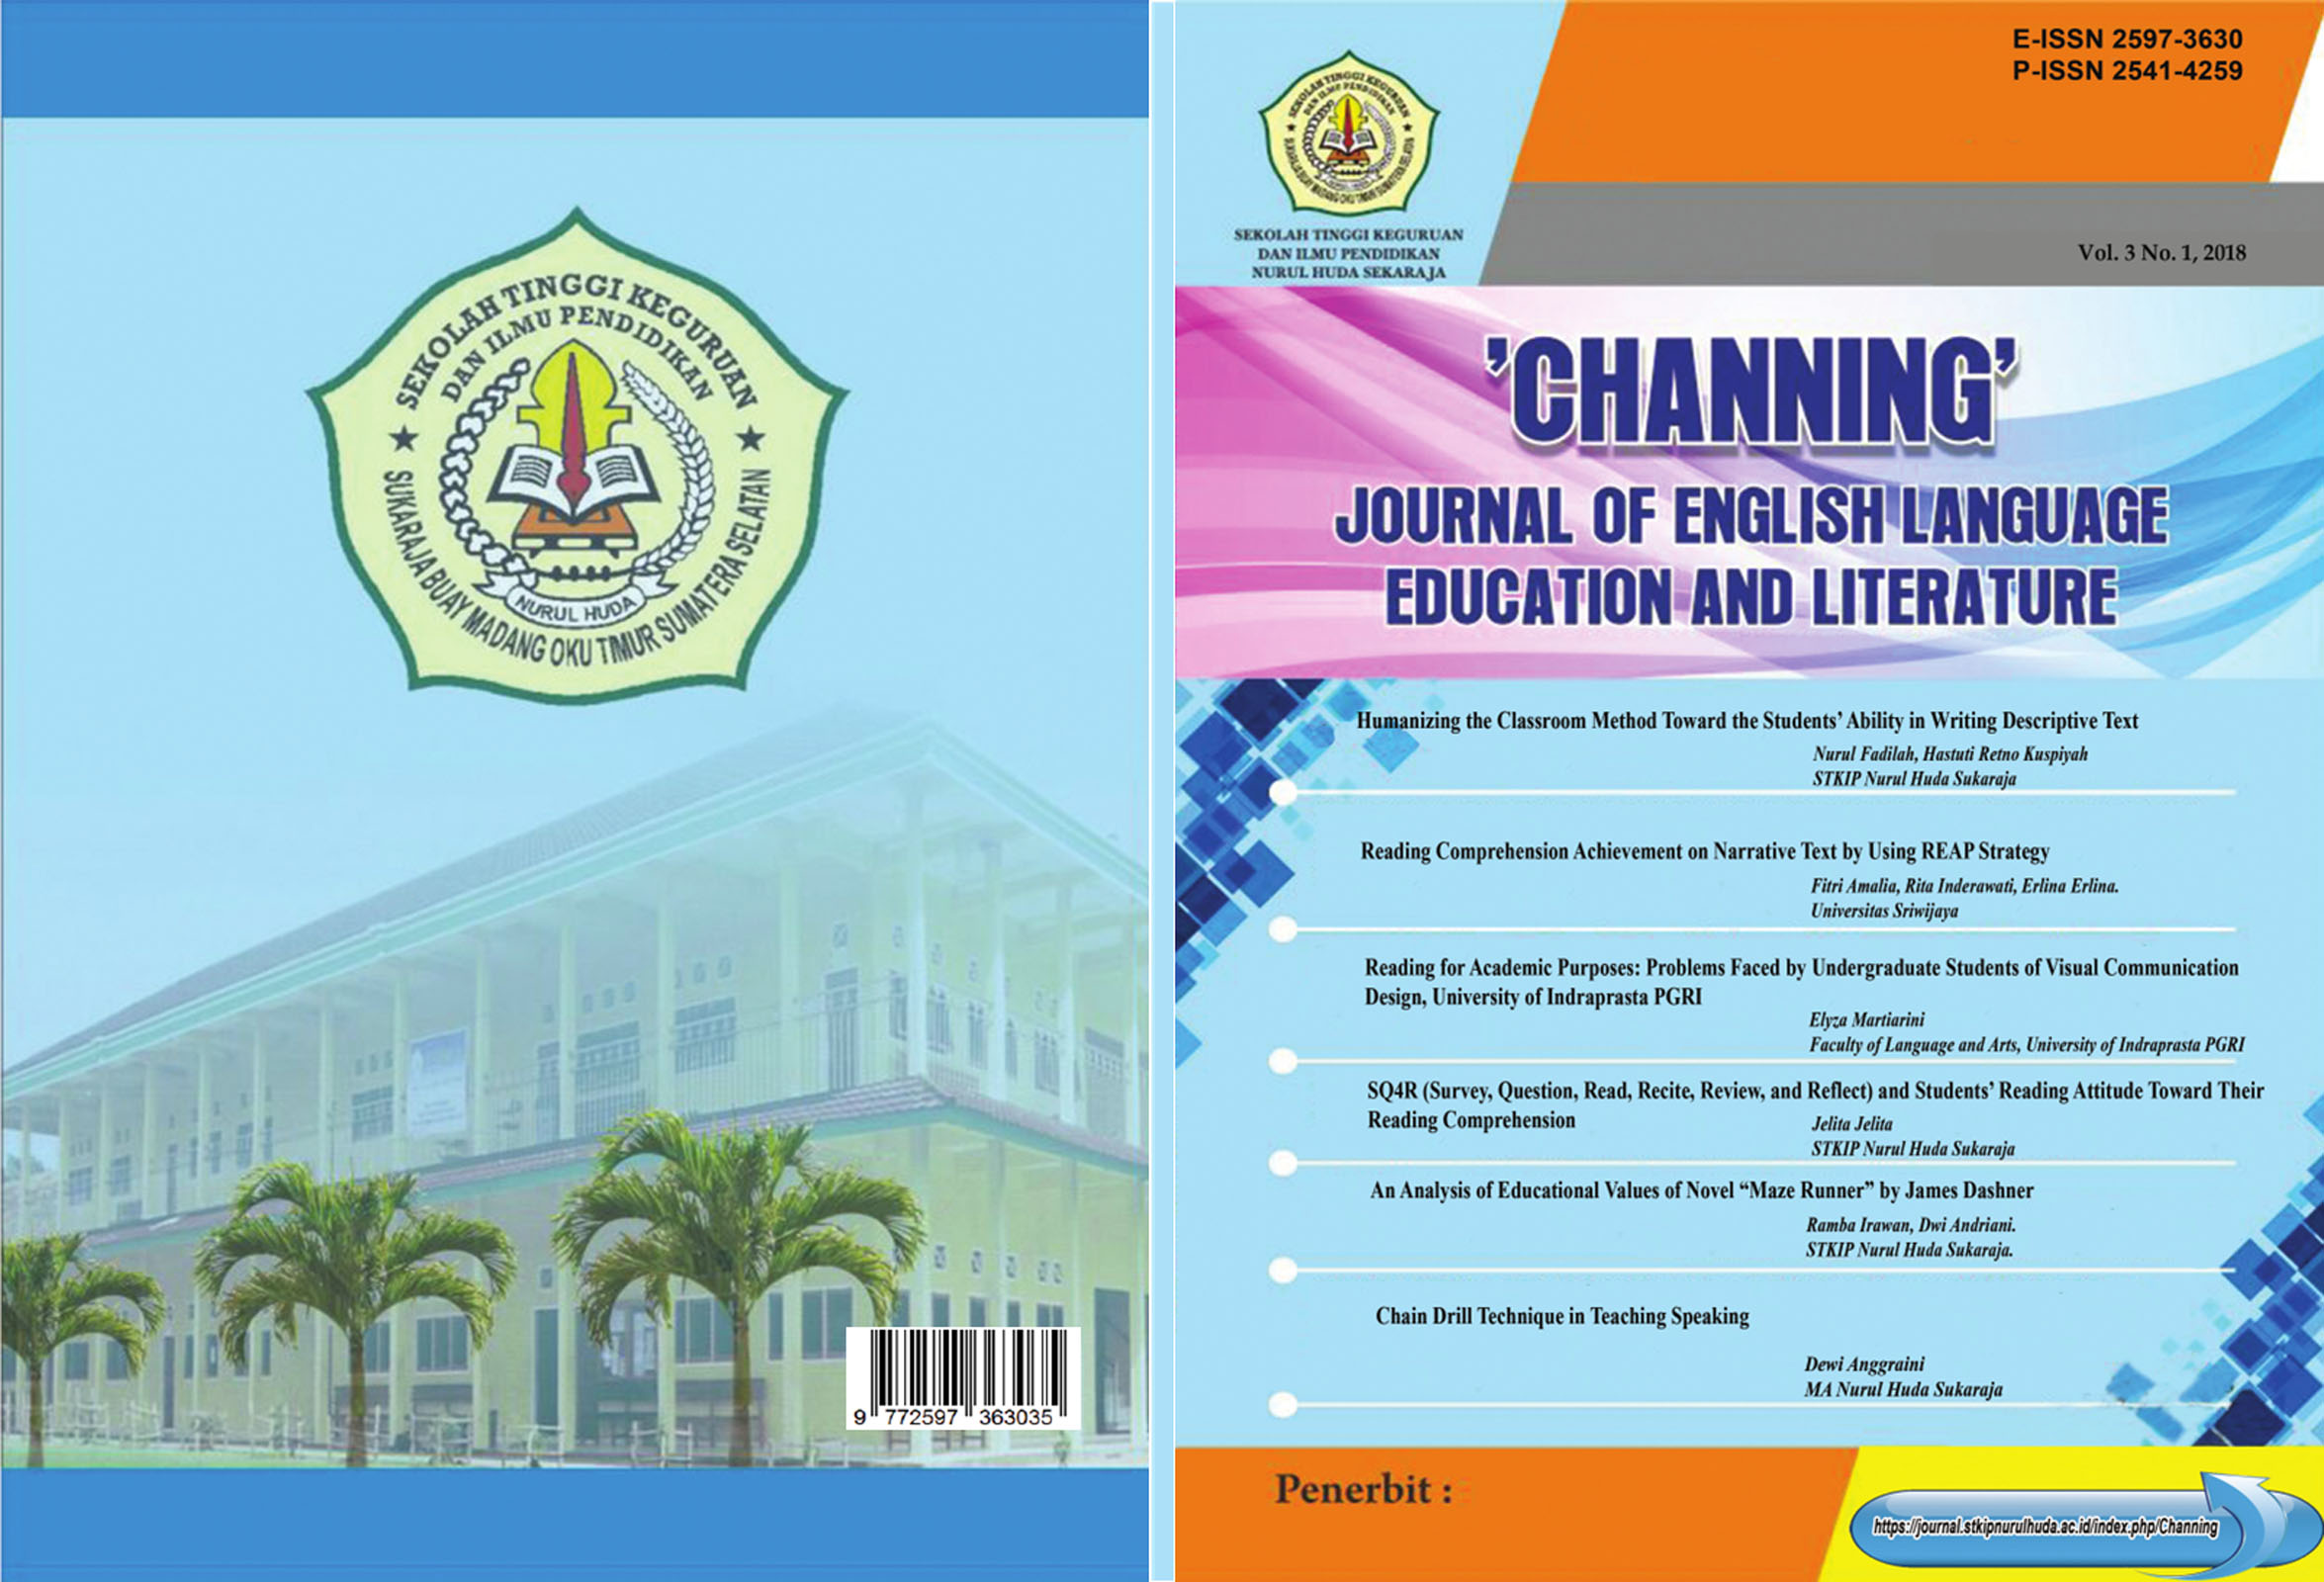 					View Vol. 3 No. 1 (2018): Channing: Journal of English Language Education and Literature - April 2018
				